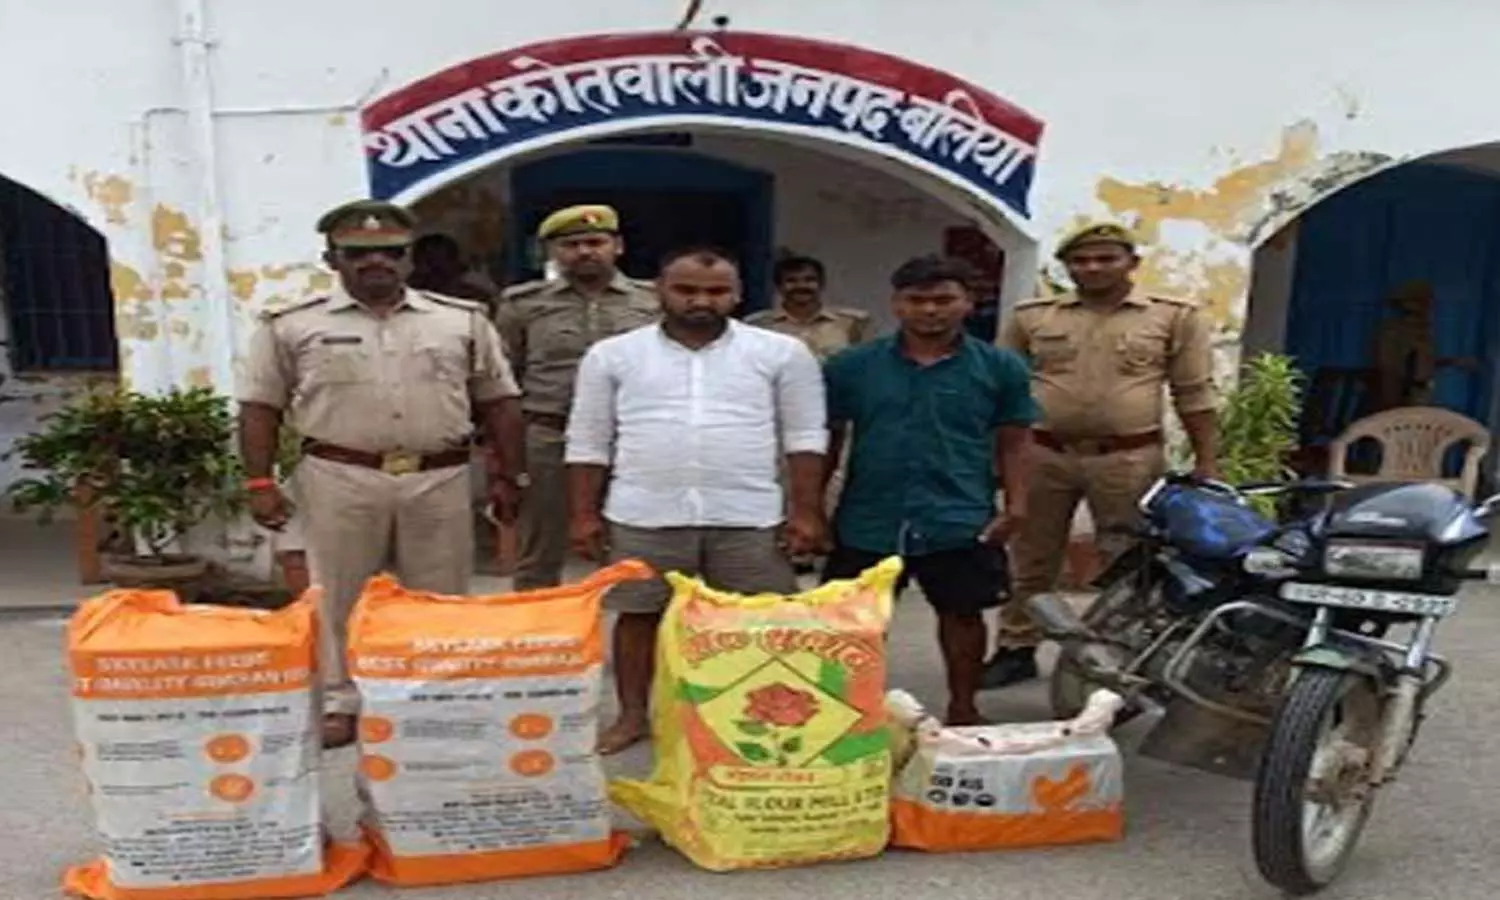 Ballia Police arrested two people with 10 boxes of illegal English liquor